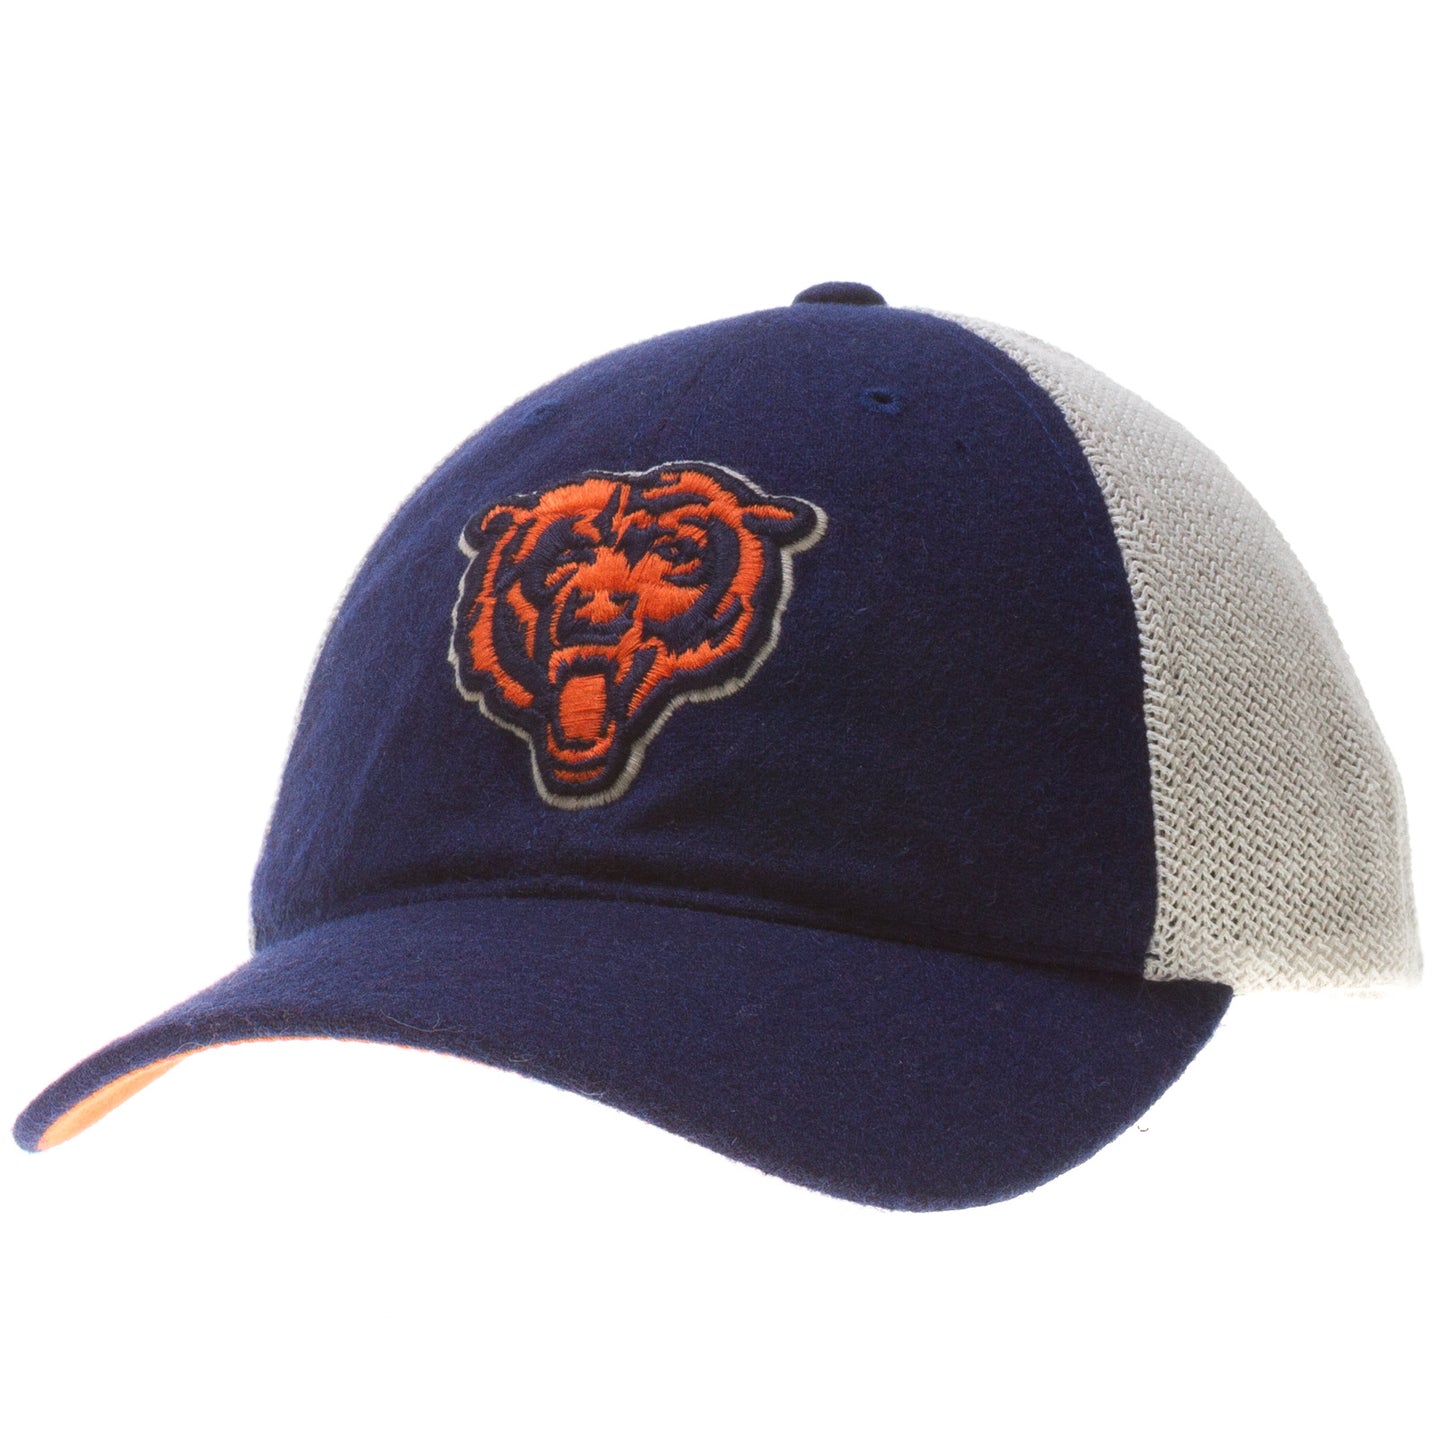 Chicago Bears Vintage Two Tone Adjustable Hat